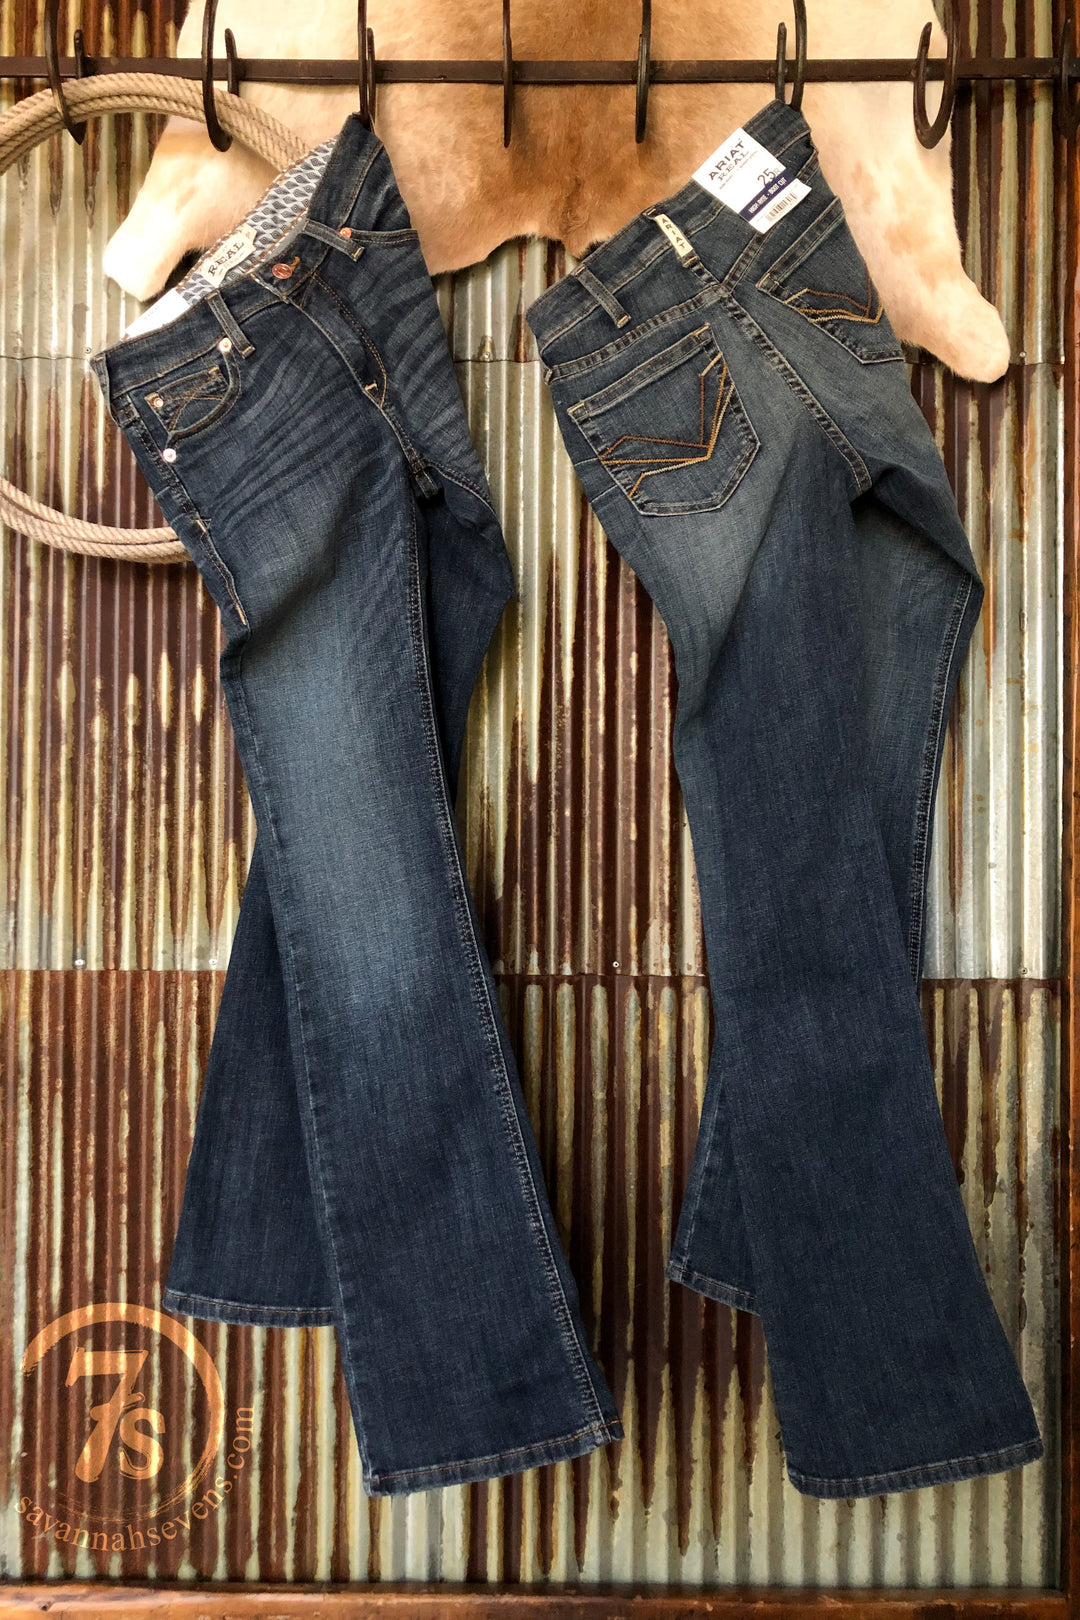 Denim clothing bootcut jeans for women - Trendy collections at